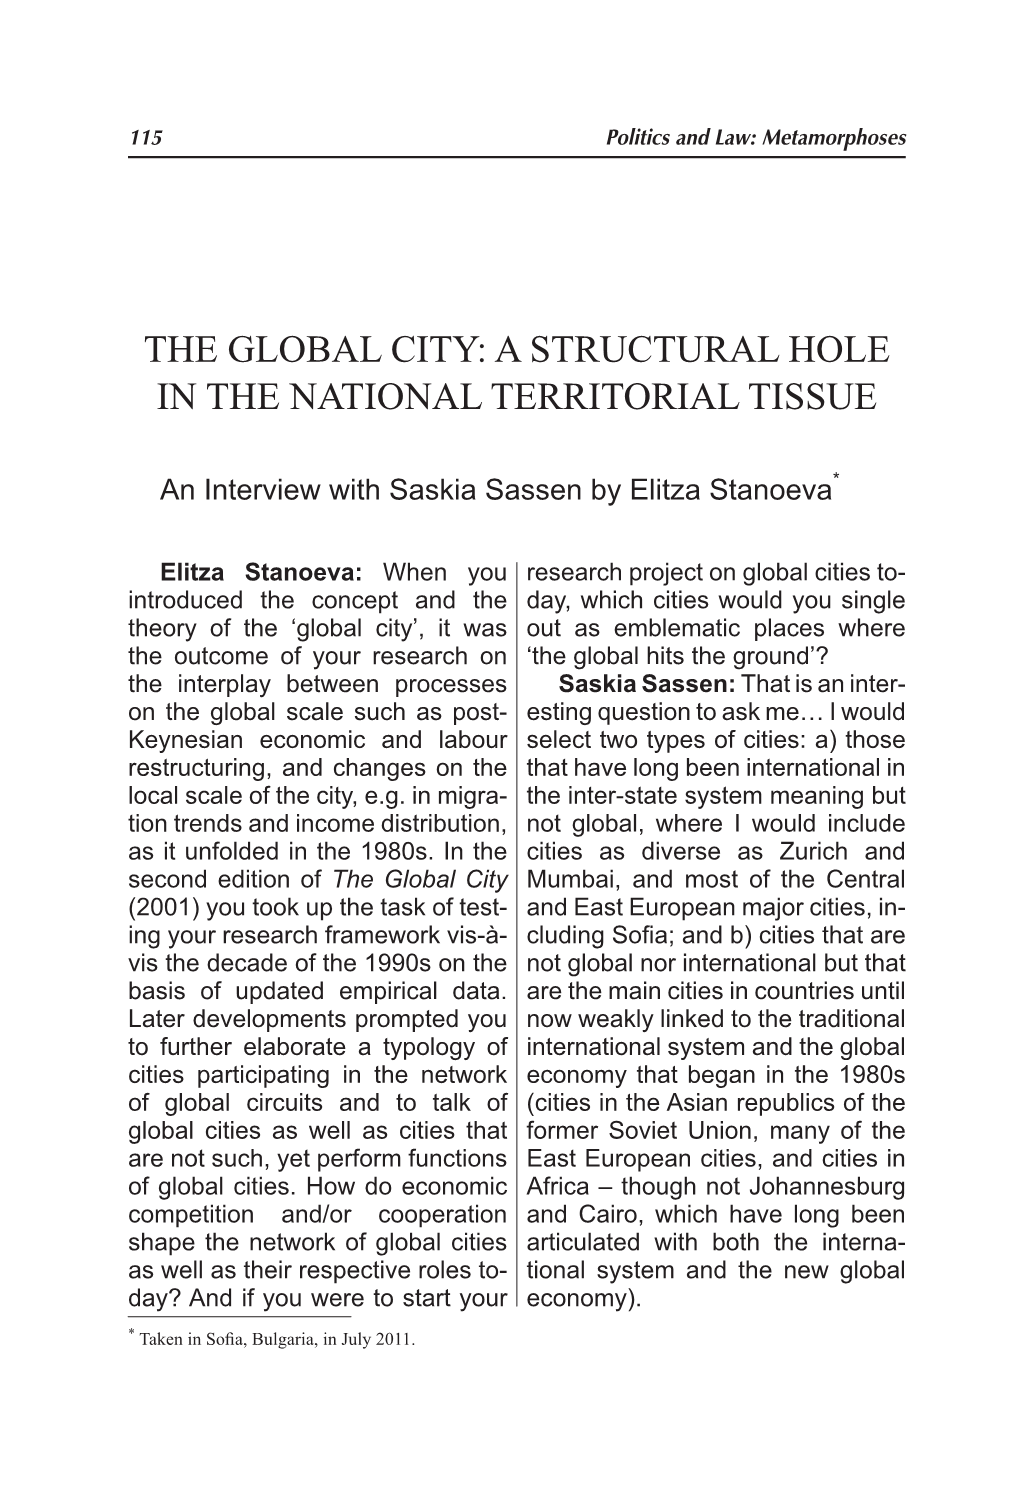 The Global City: a Structural Hole in the National Territorial Tissue